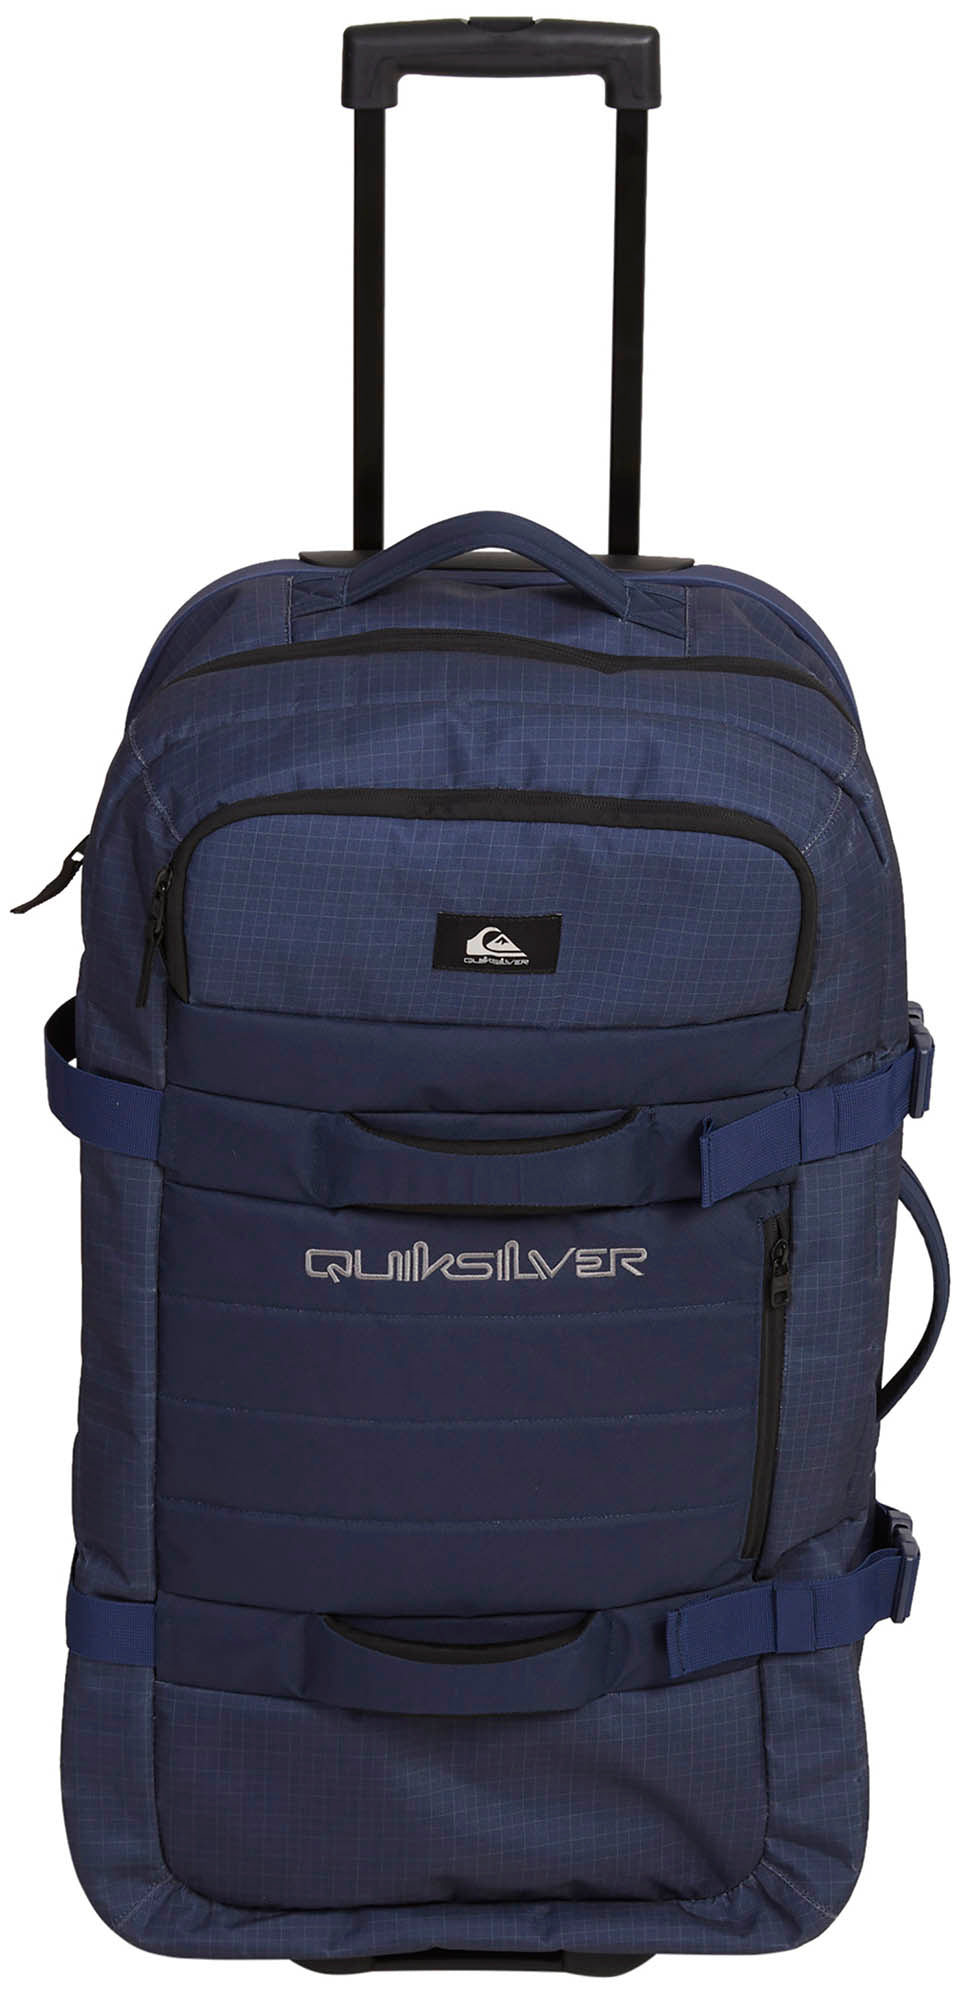 Reach Quiksilver – New 100L Naval Suitcase - Academy thebackpacker